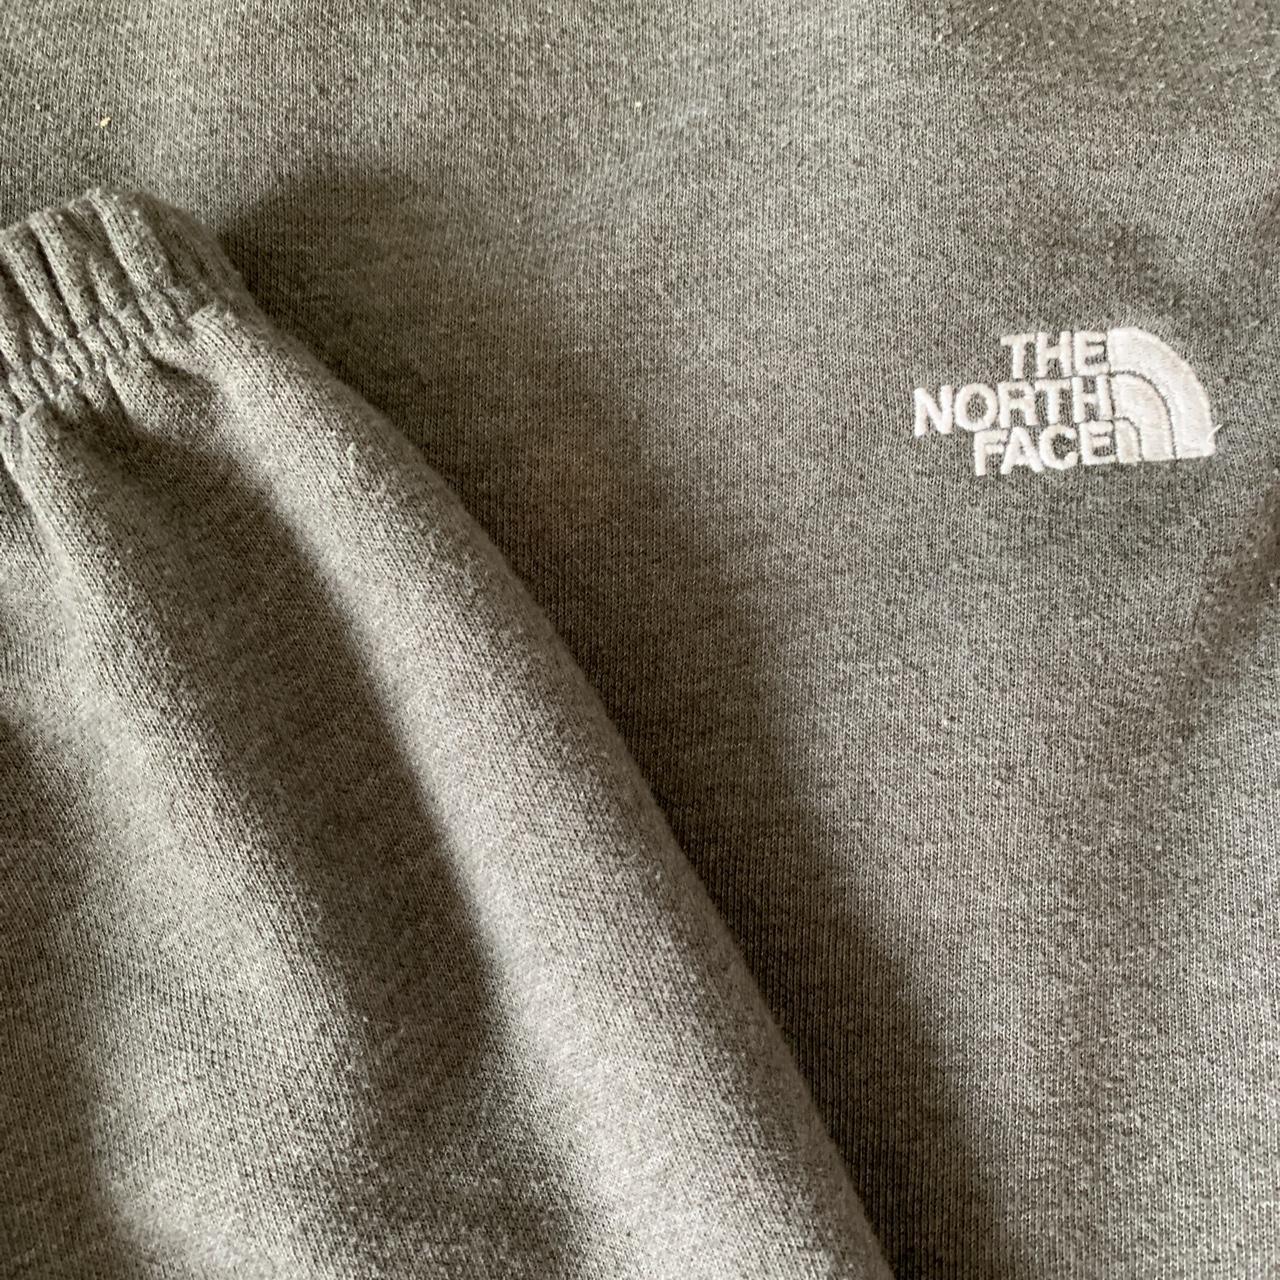 The North Face Men's Black and Grey Joggers-tracksuits | Depop